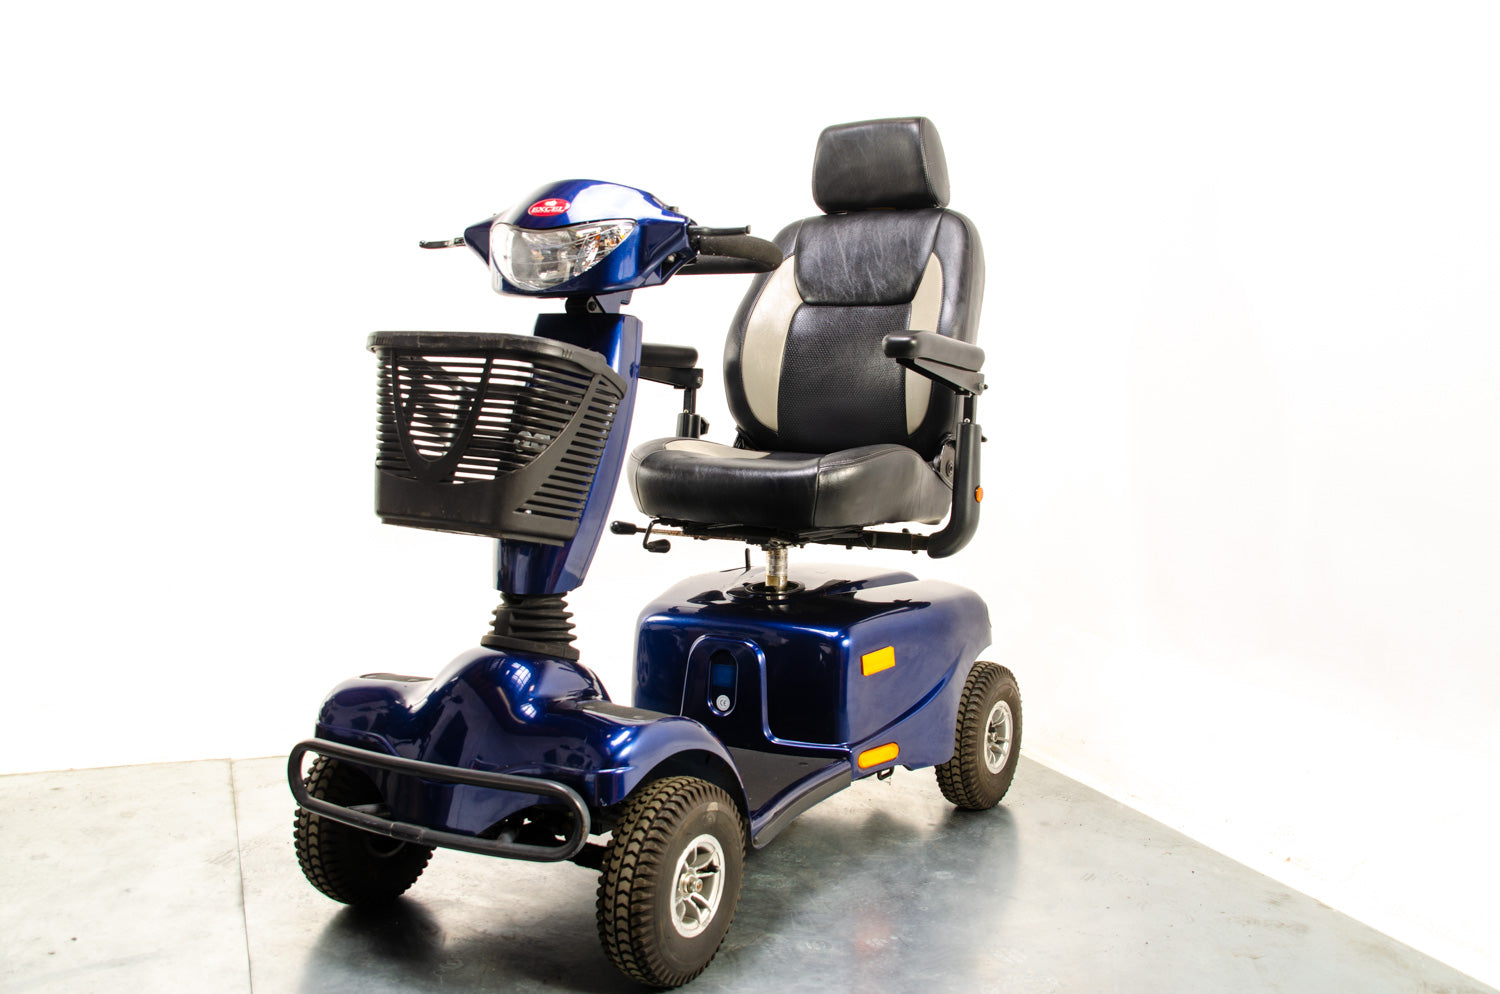 2012 Van Os Excite 4 8mph Large Size Mobility Scooter In Blue